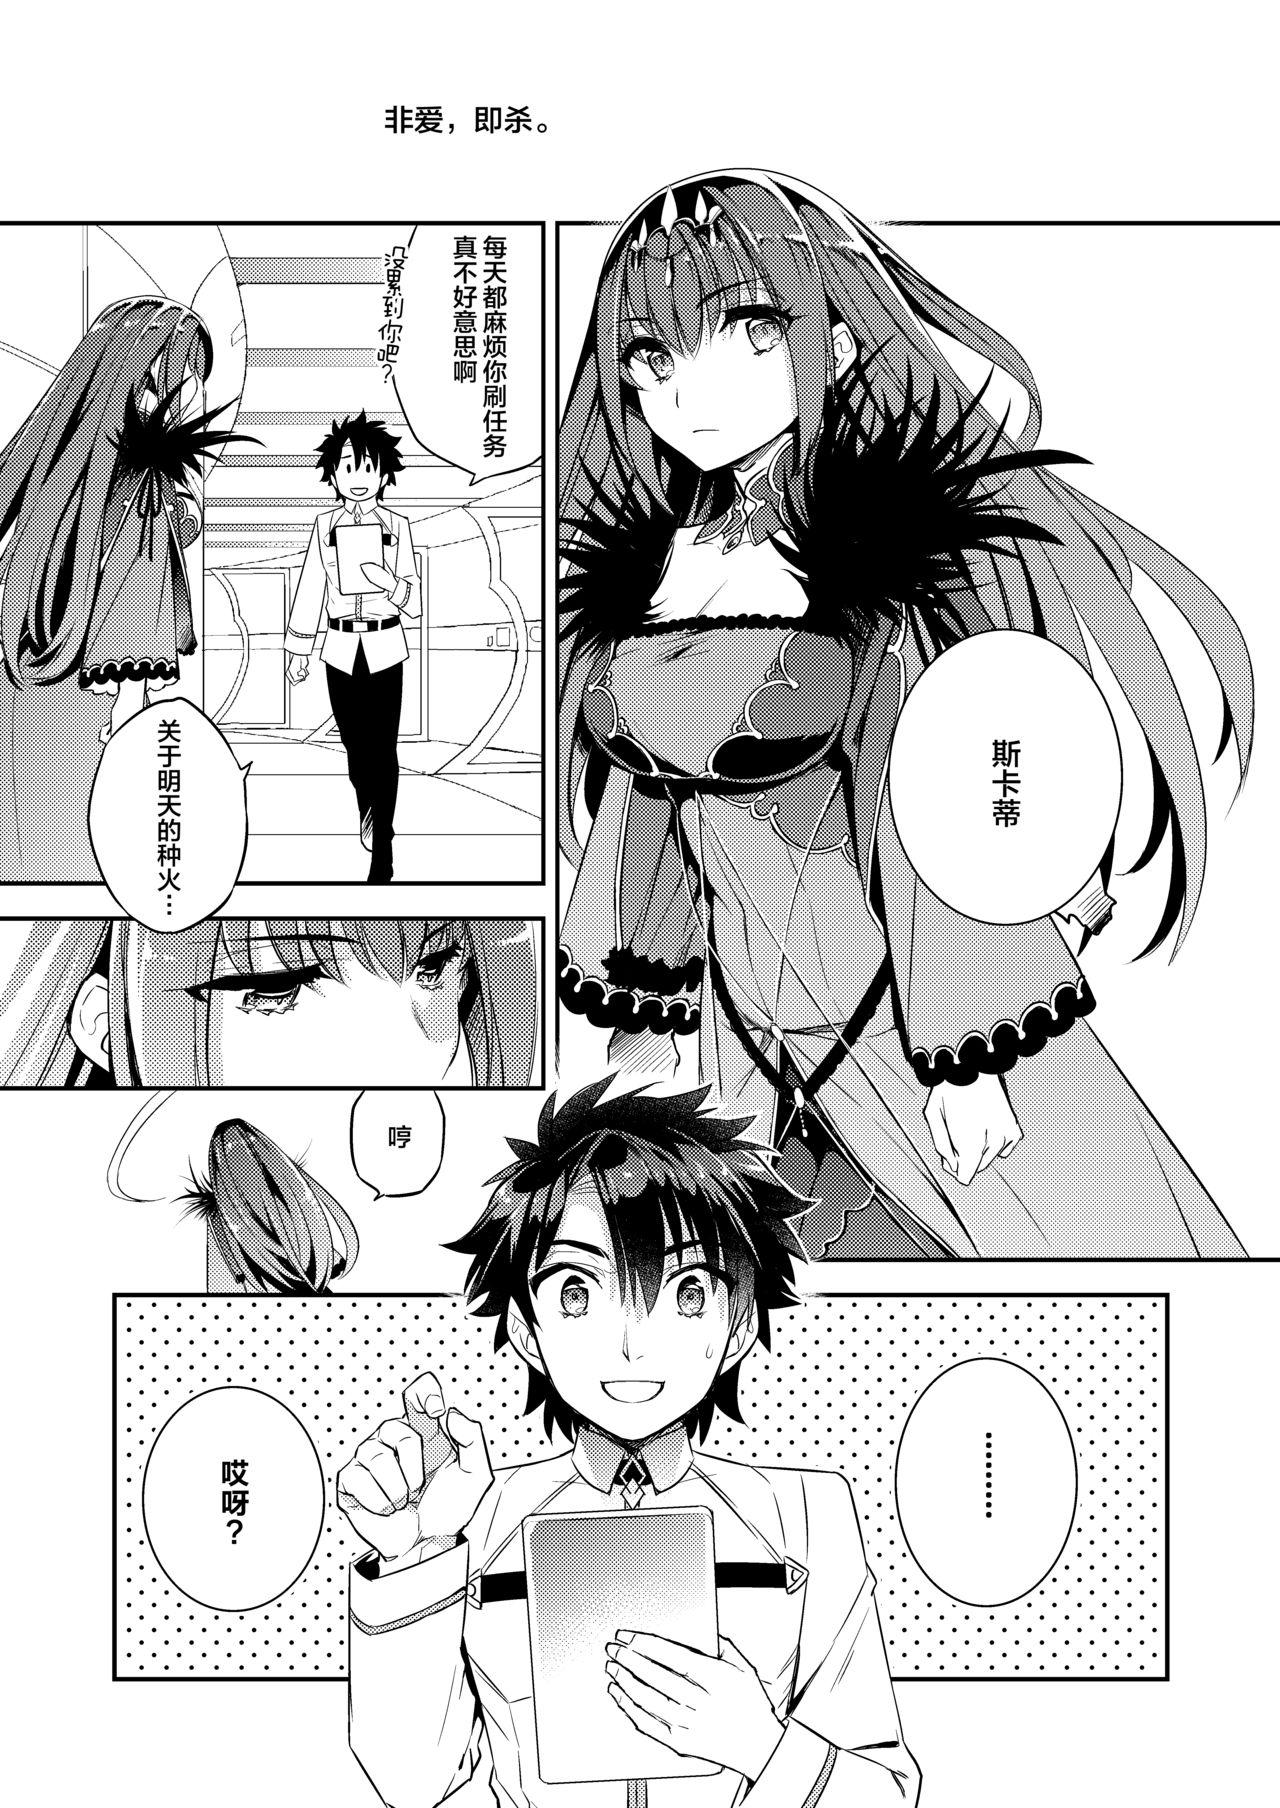 Pija C9-39 W Scathach to - Fate grand order Gangbang - Page 3